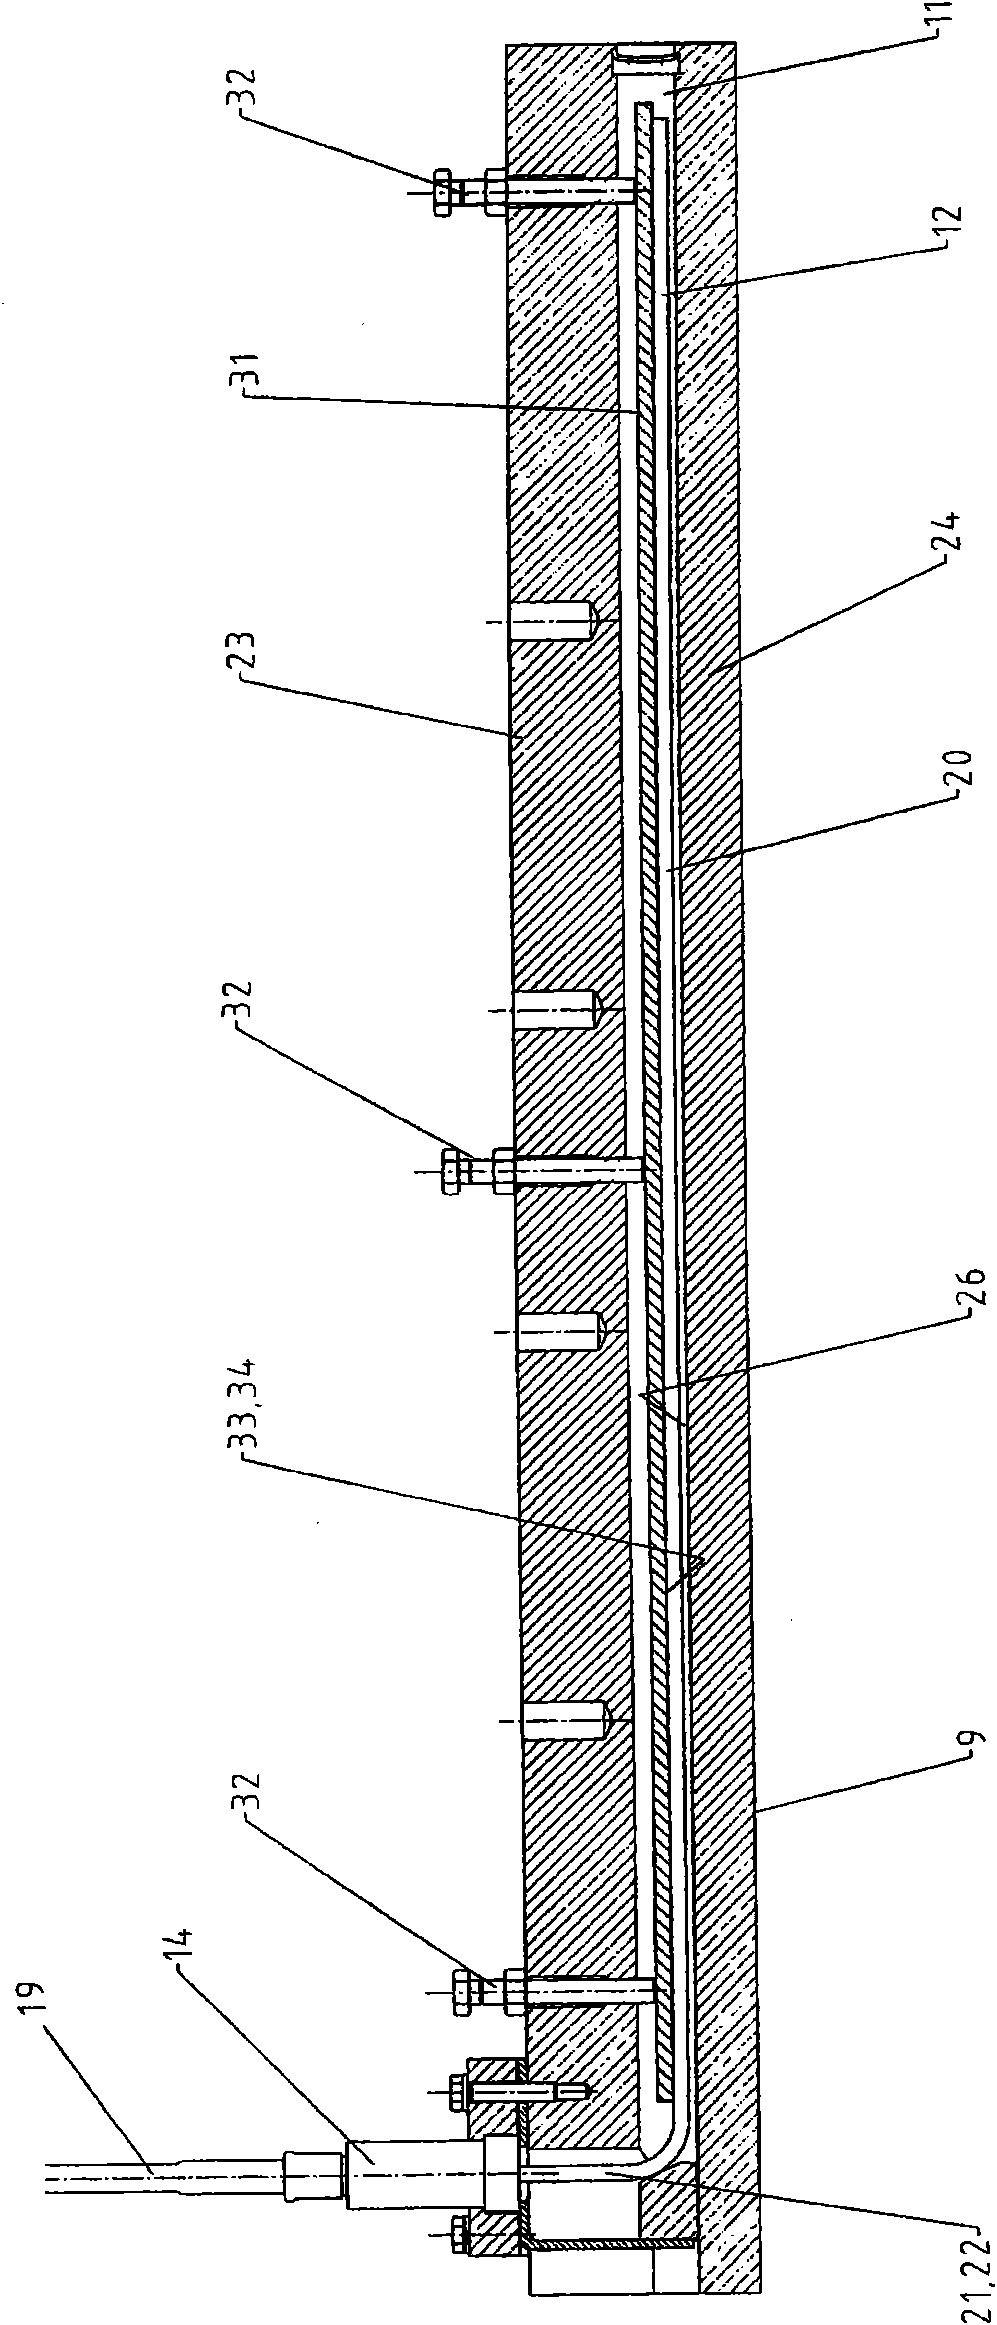 Device for compacting road paving materials